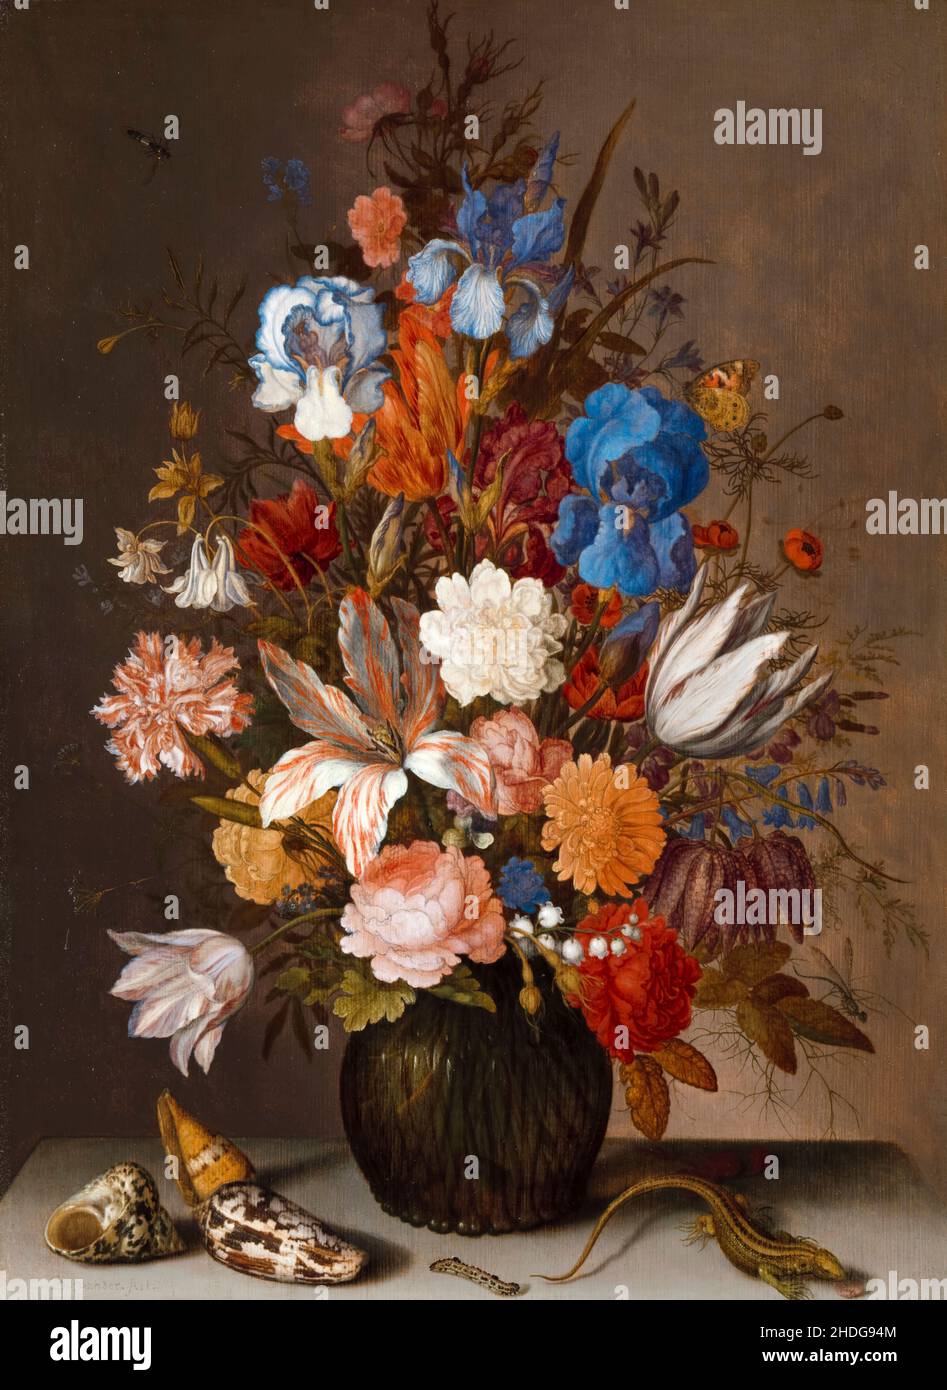 Balthasar van der Ast, Still life with flowers, painting, 1625-1630 Stock Photo